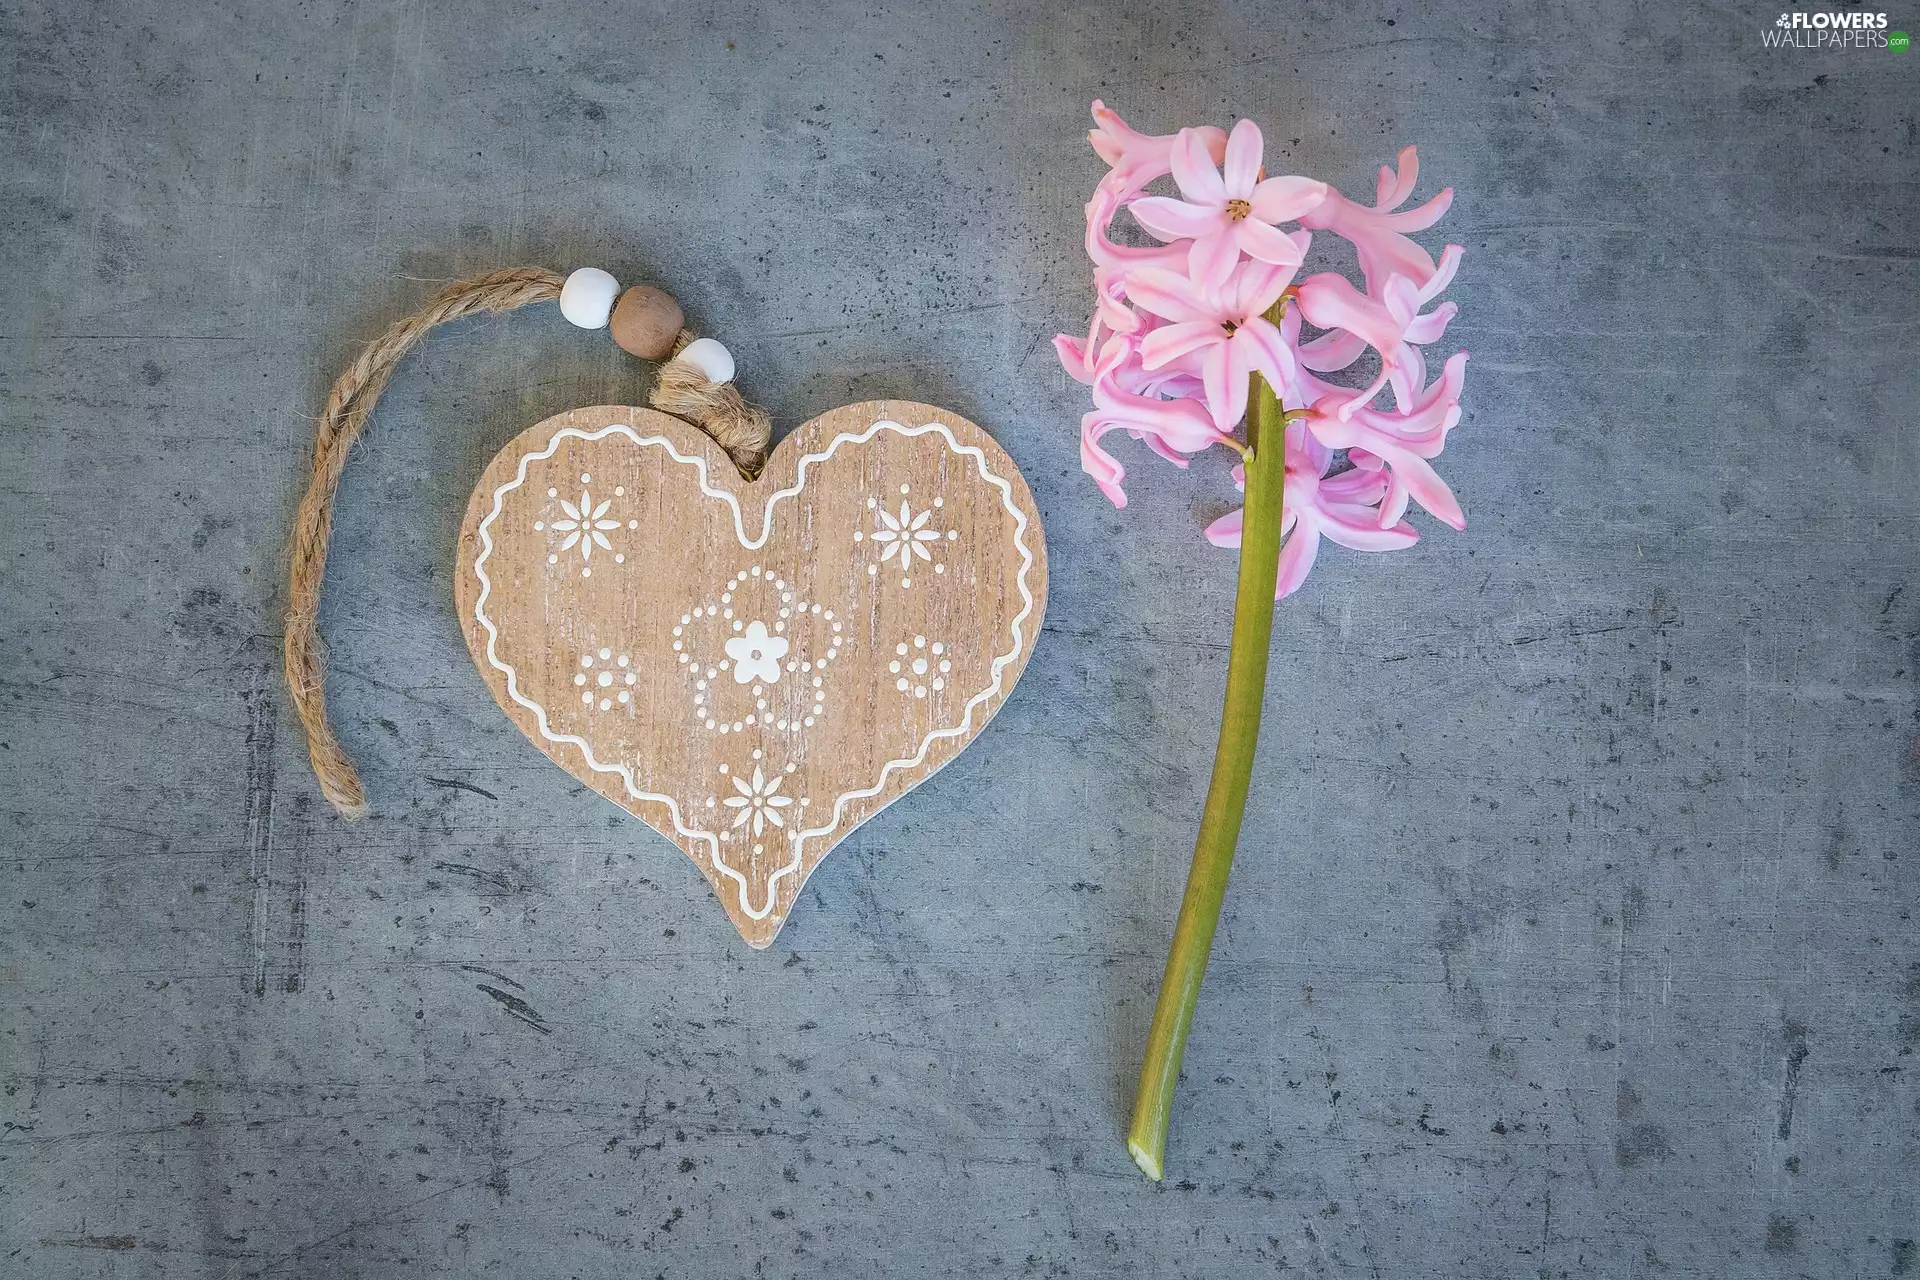 Colourfull Flowers, wood, hyacinth, Heart, Pendant, Pink, Grey Background